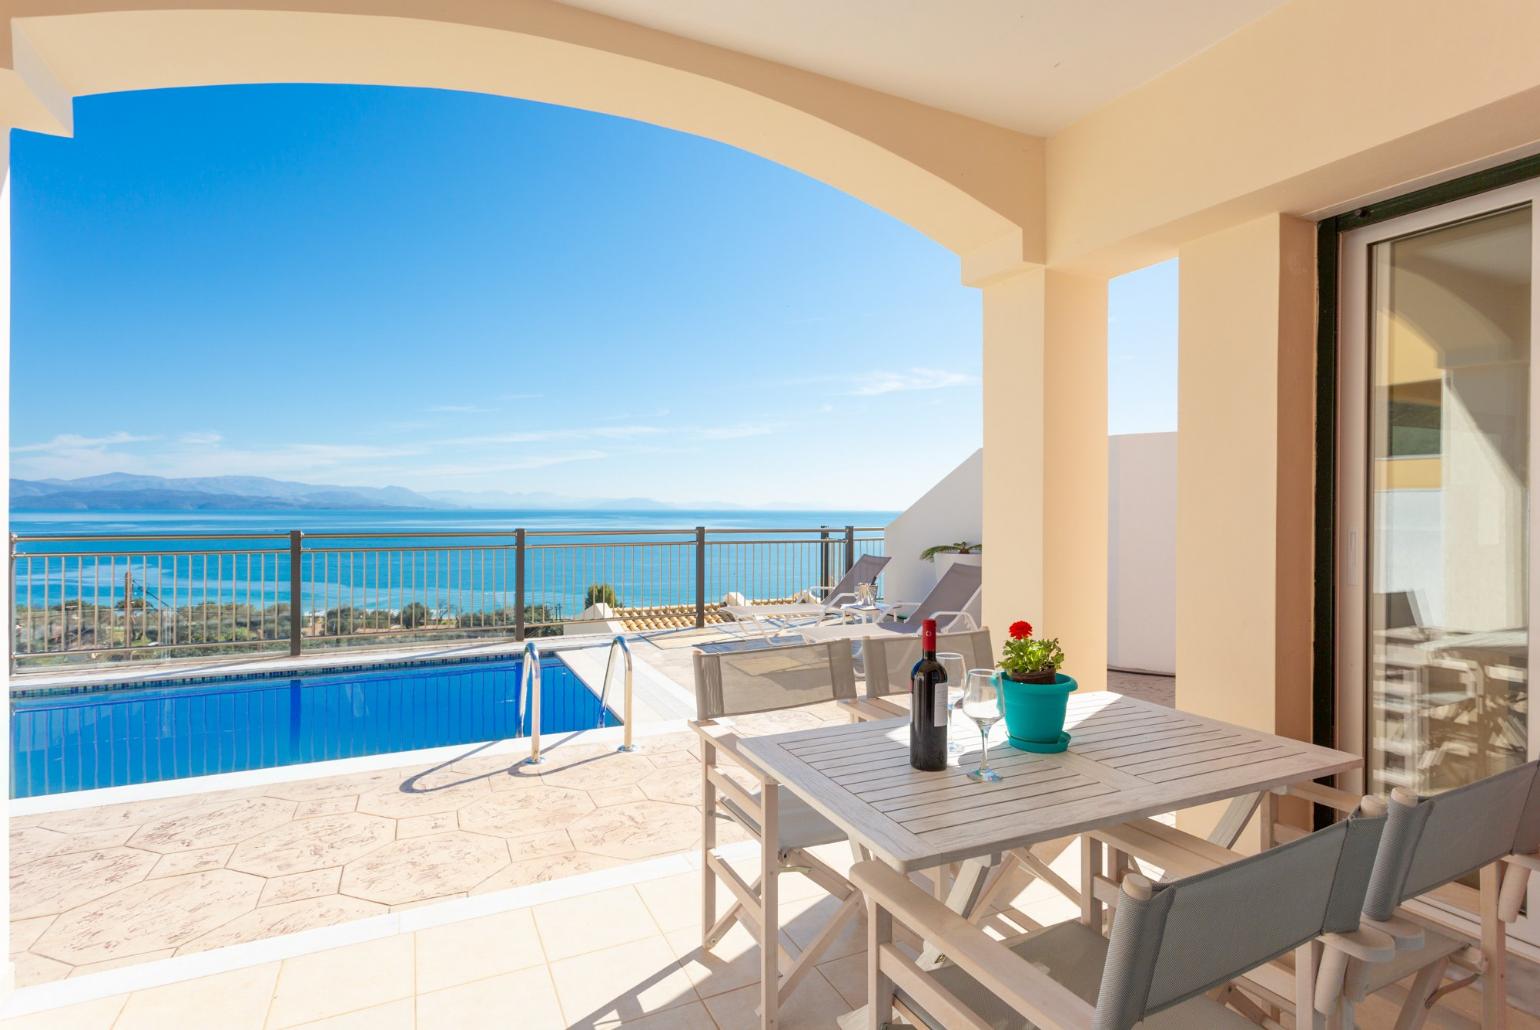 Private pool and terrace area with panoramic sea views